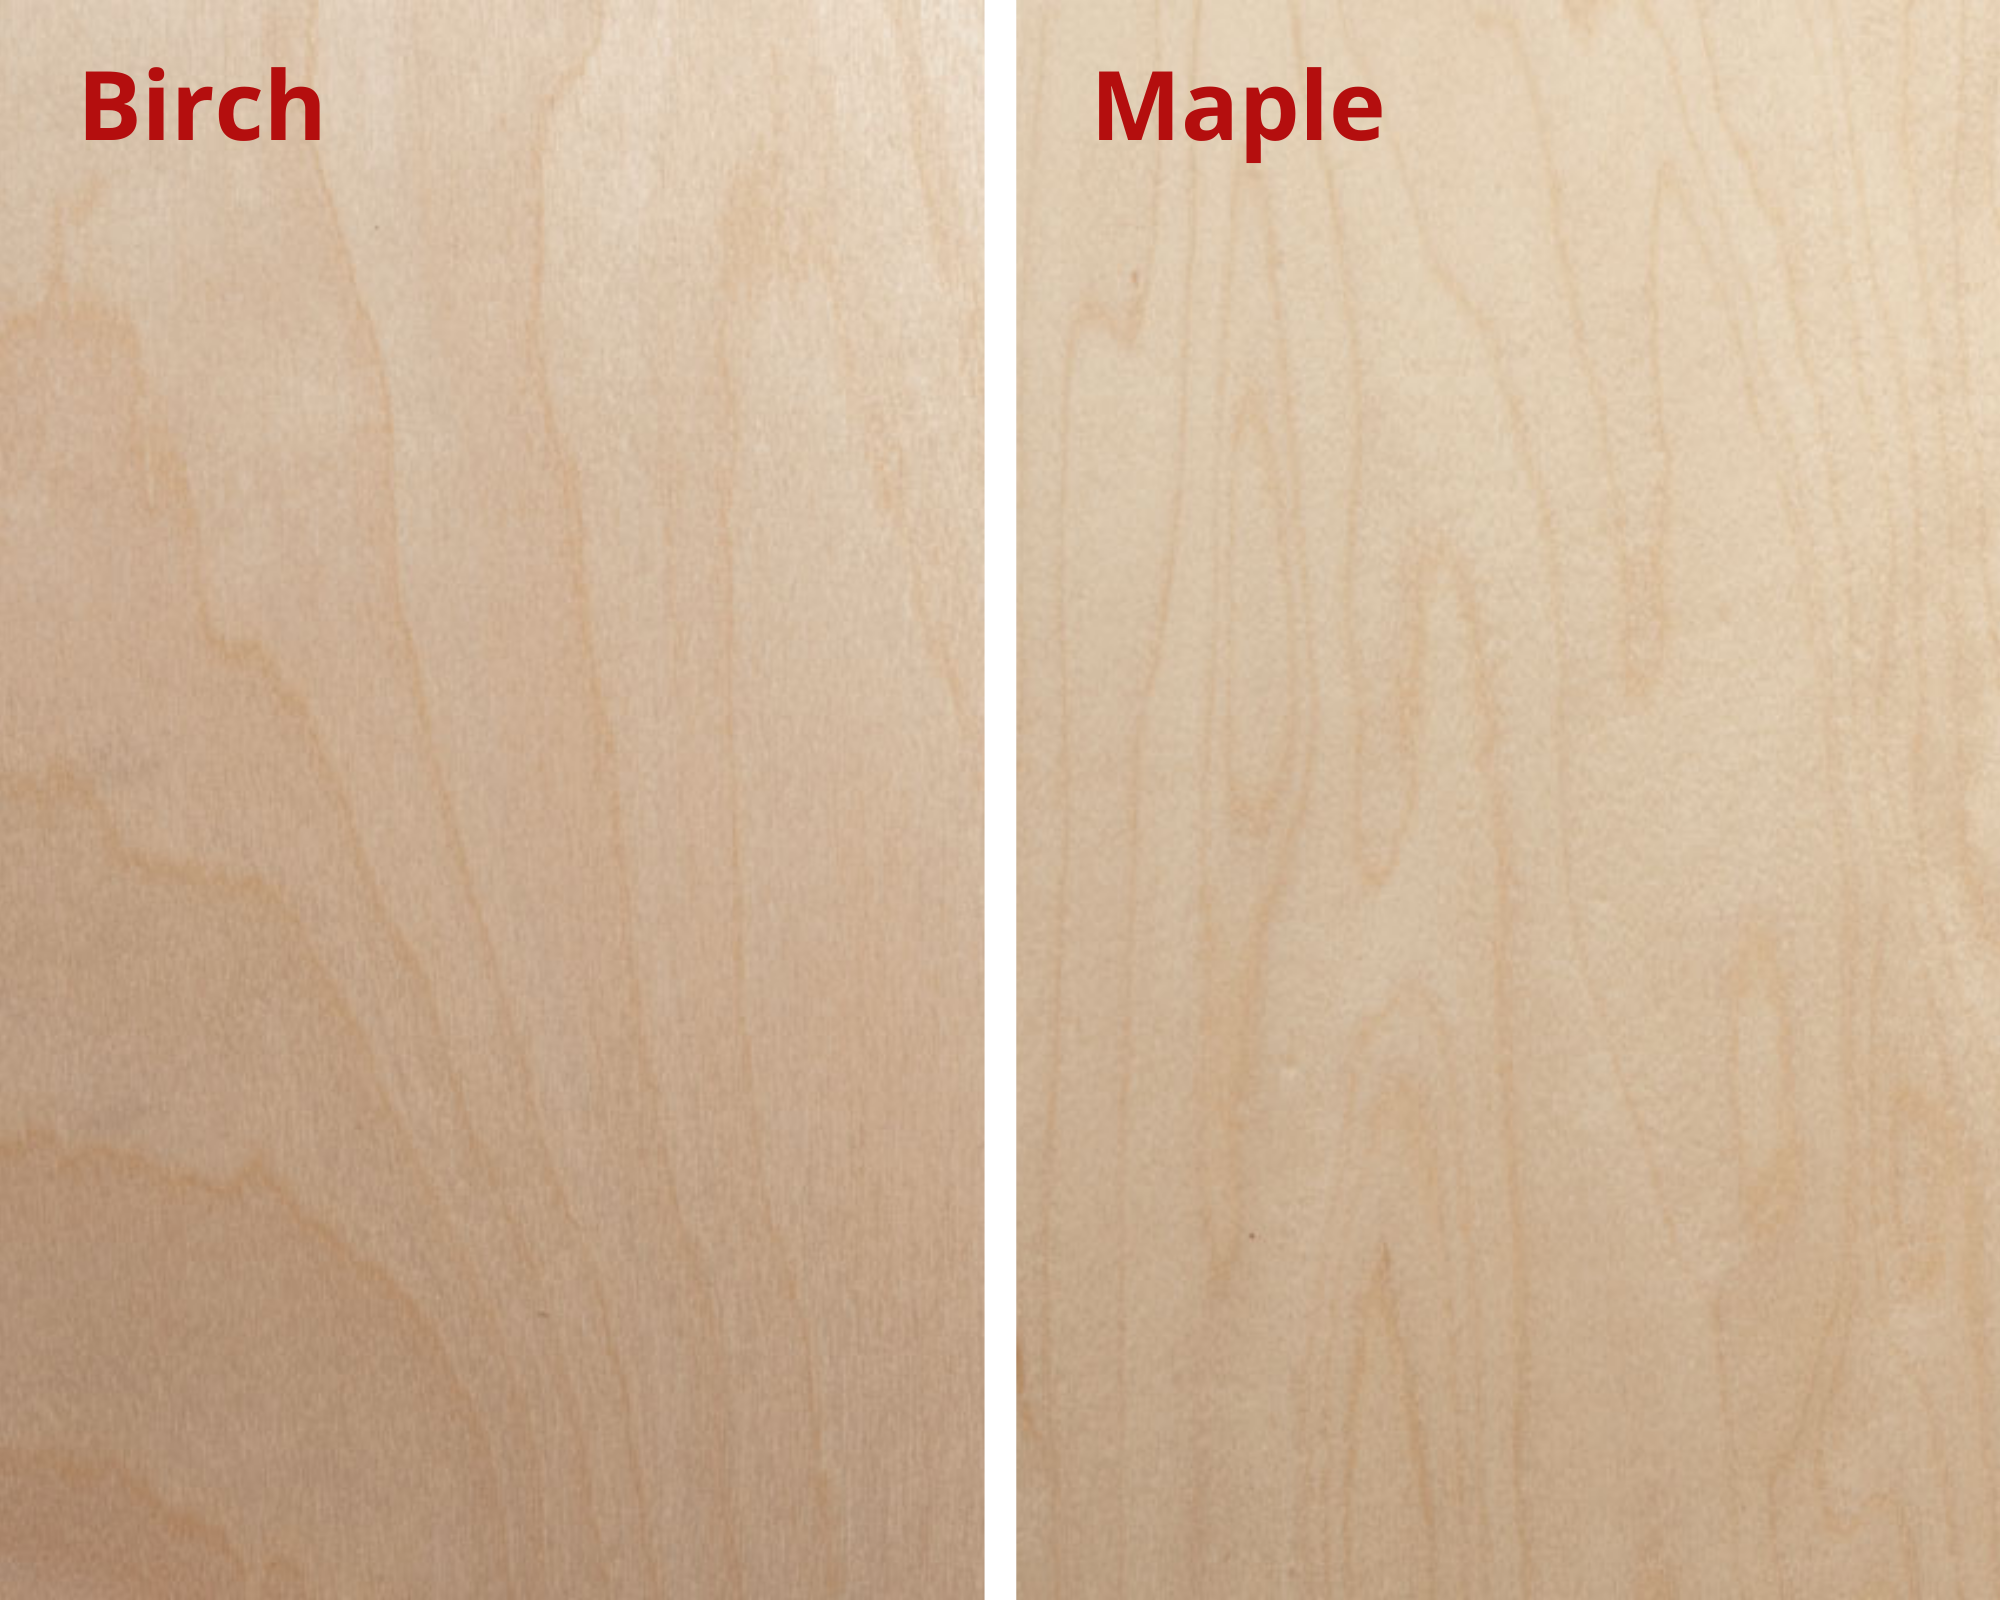 birch and maple